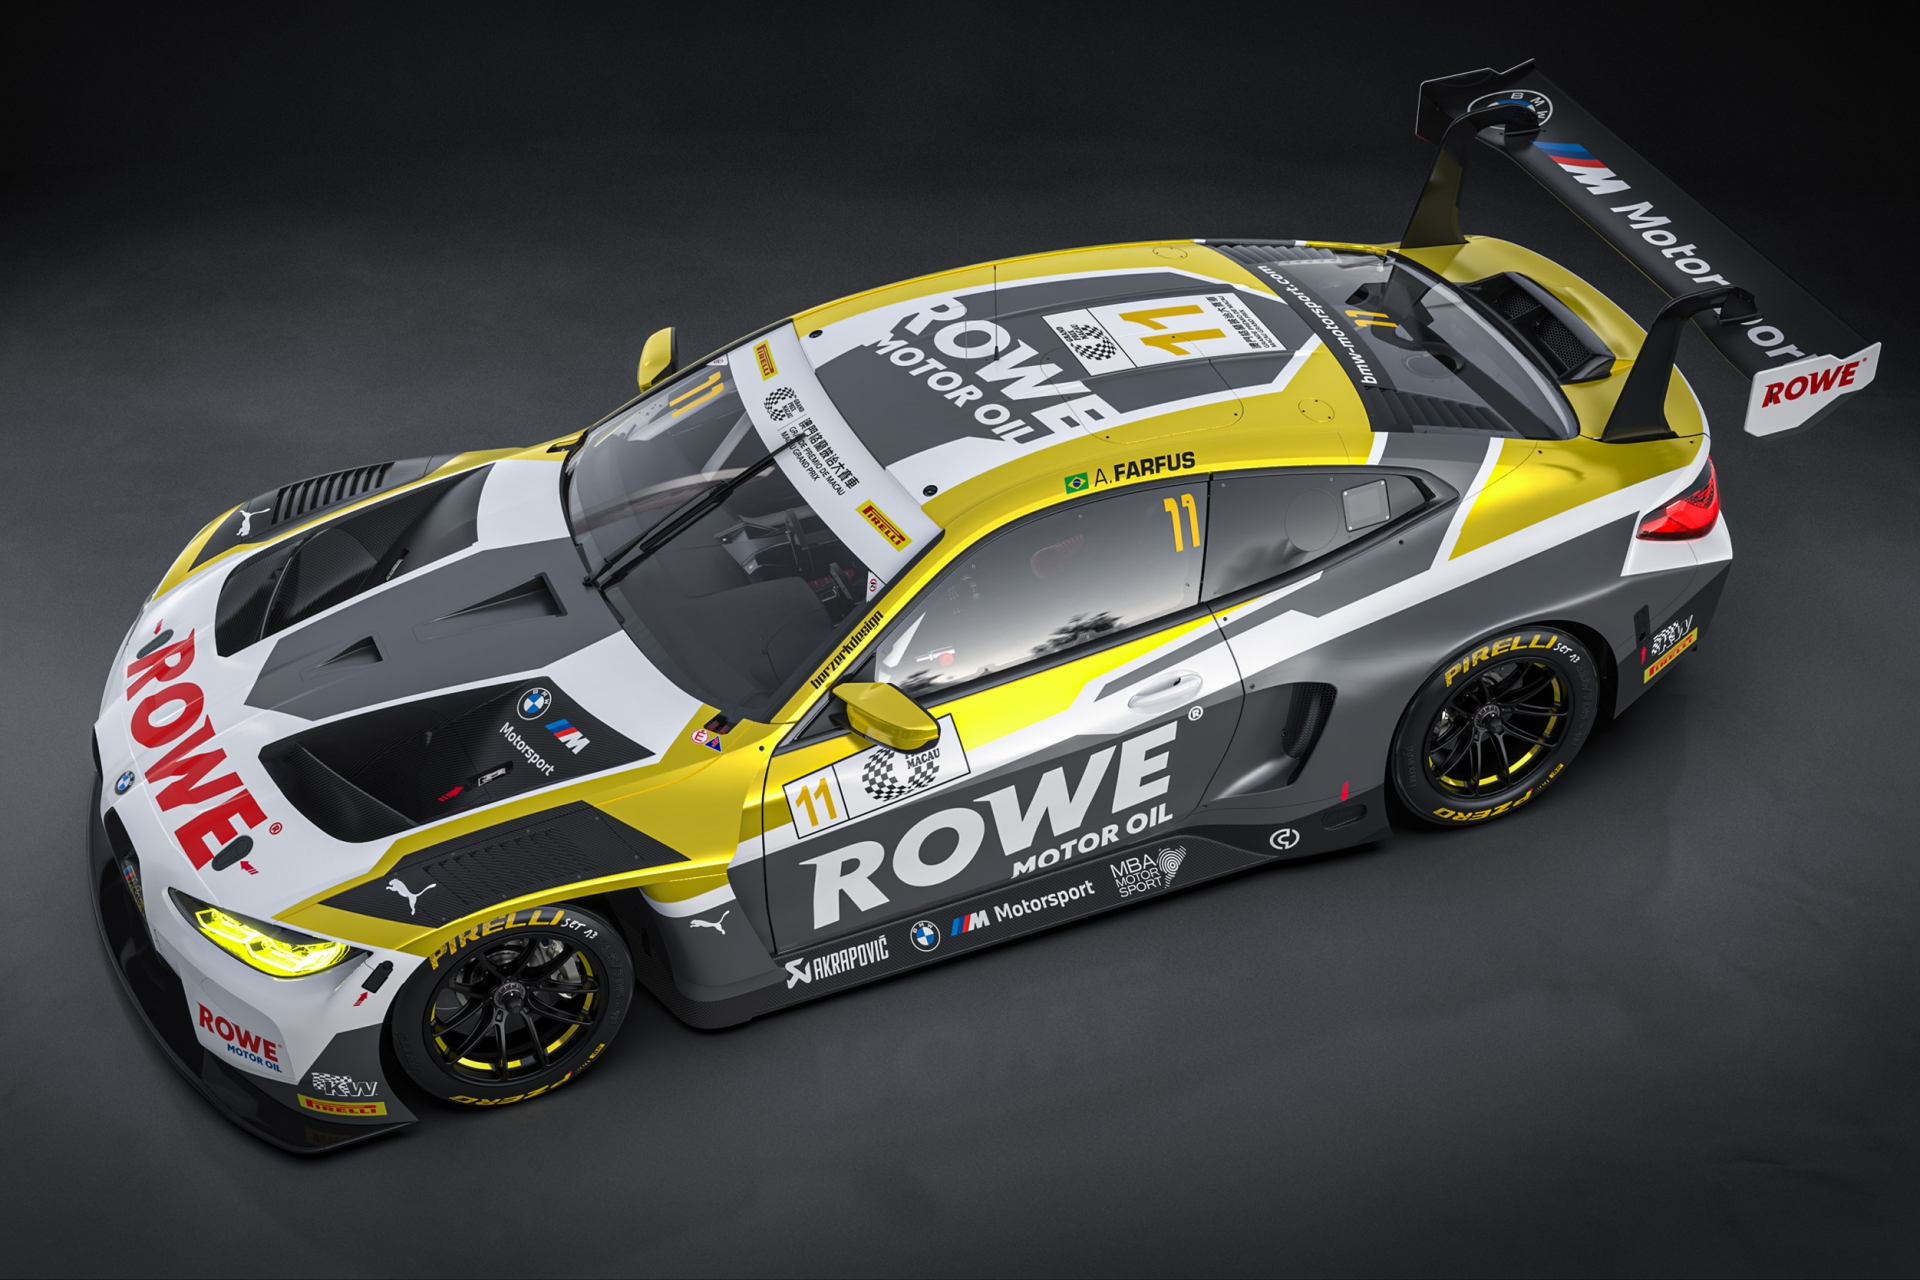 BMW M Motorsport returns to Macau: BMW M Team WRT and ROWE Racing start at  the FIA GT World Cup